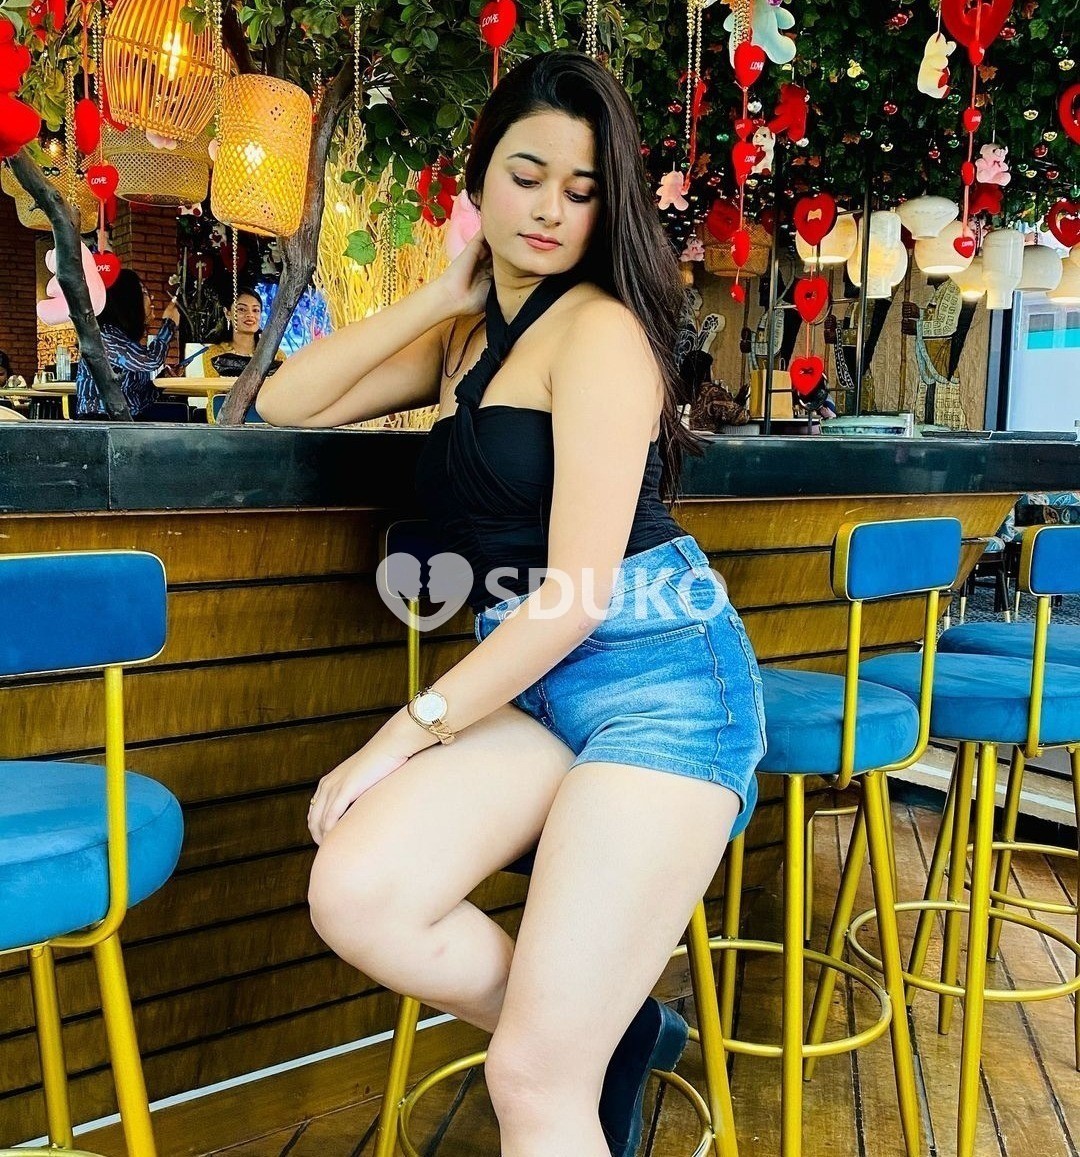 Mira road Genuine ⭐⭐ service 🔥100% 💫SAFE AND 💋SECURE 💋⭐💫TODAY LOW PRICE UNLIMITED ENJOY HOT COLLEGE